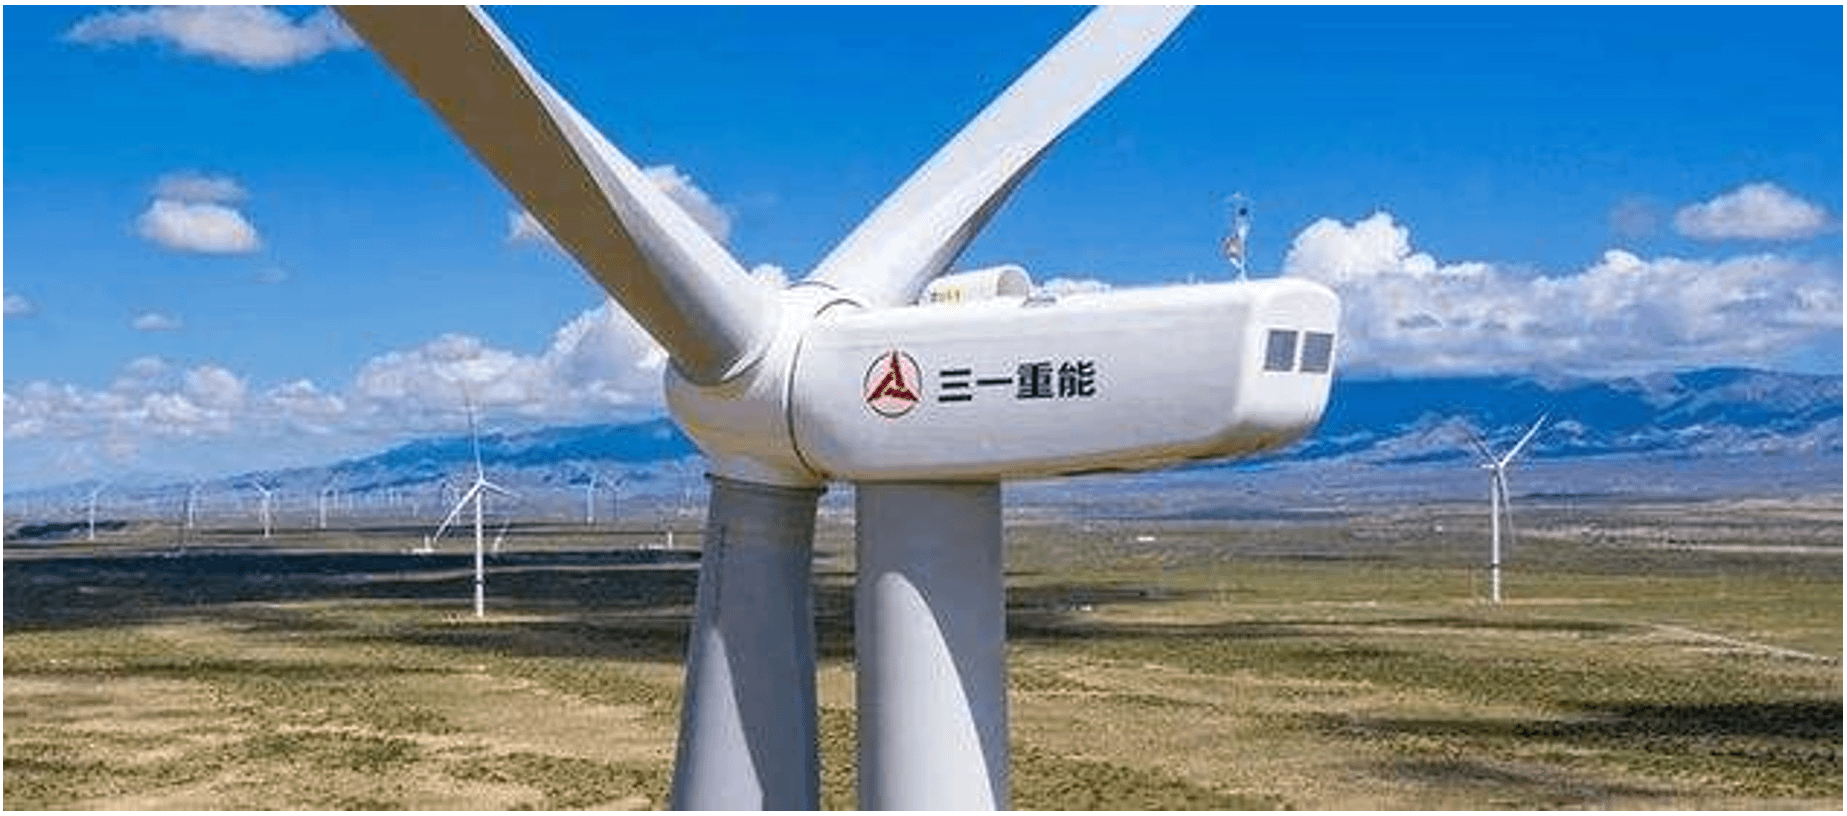 SPIC releases results for 3.9 GW worth of wind turbines, Sany bid reaches record 1420 CNY/kW